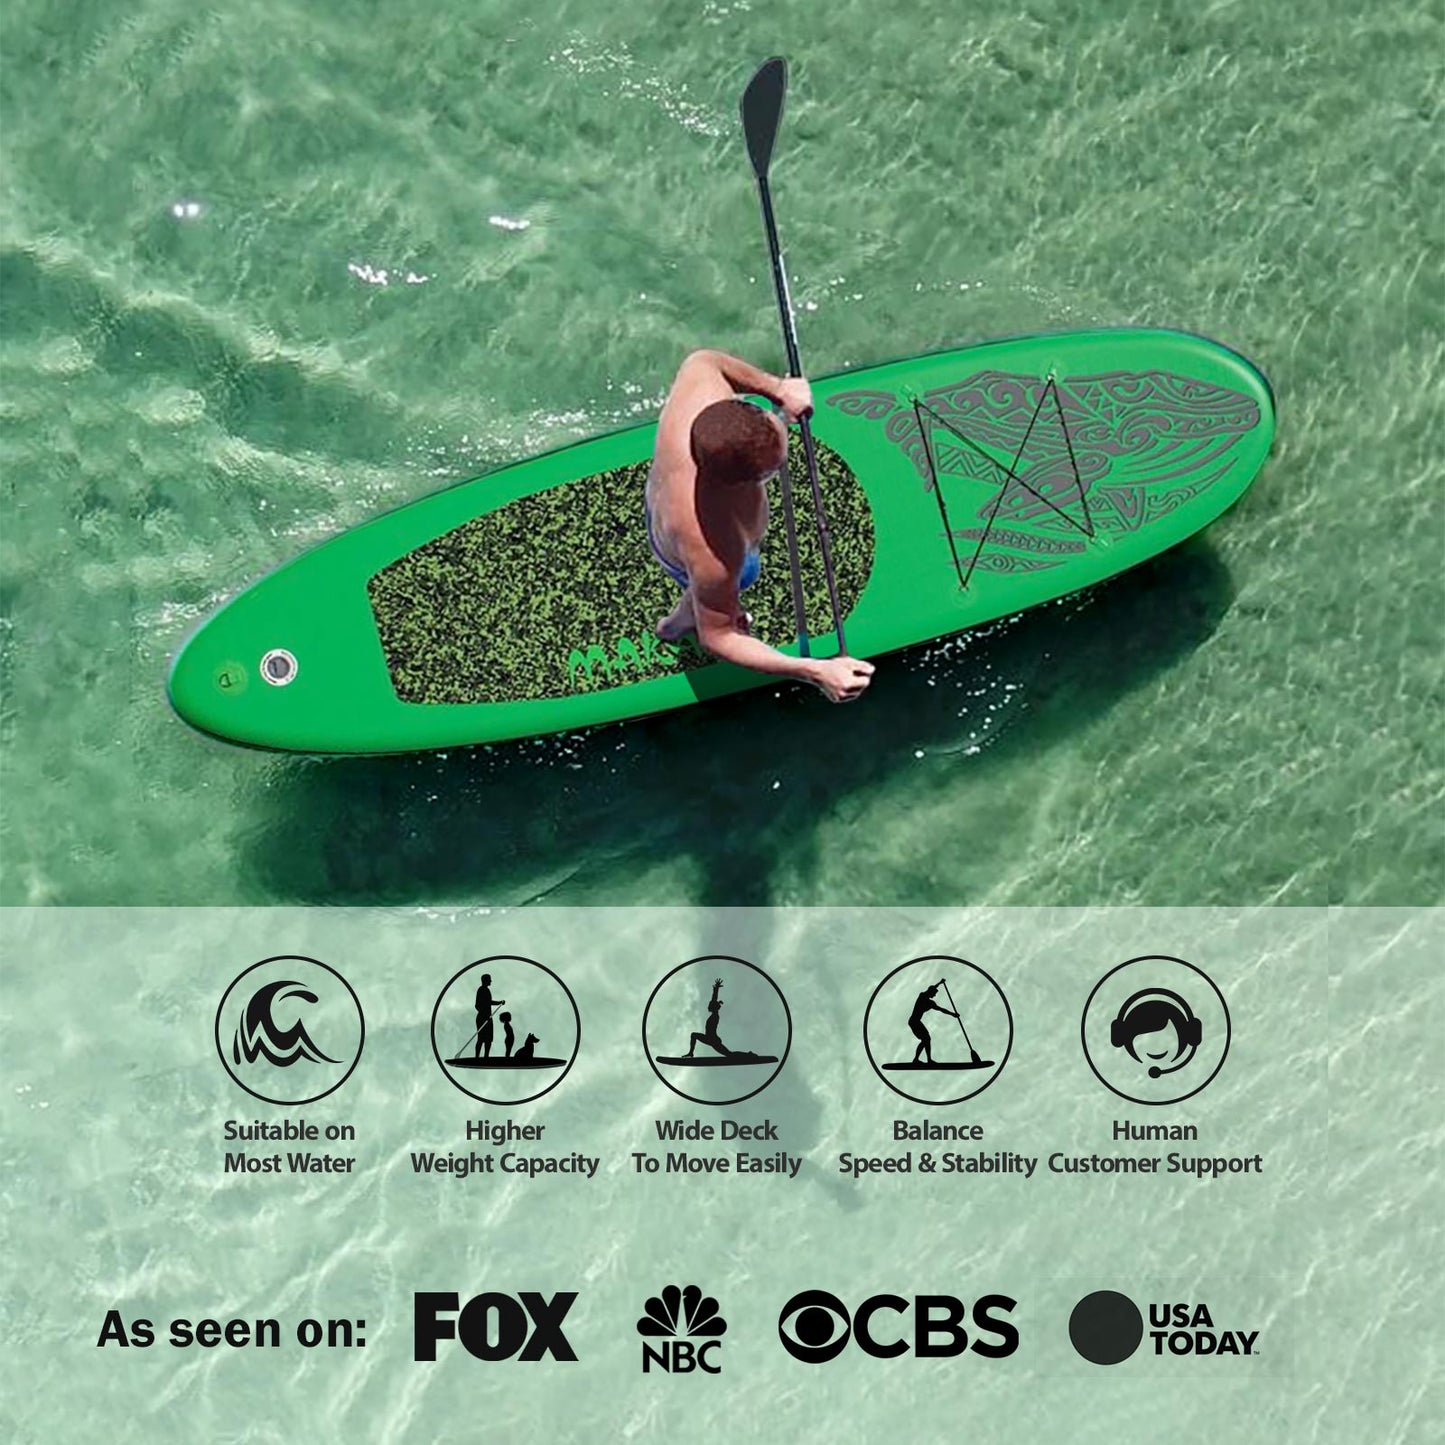 TGO Gear 10.5' iSUP Inflatable Stand Up Paddle Board - All-Around Versatility, Anti-Slip Deck, 3 Fins - Includes Pump, Leash, Backpack, Repair Kit - Green Mako